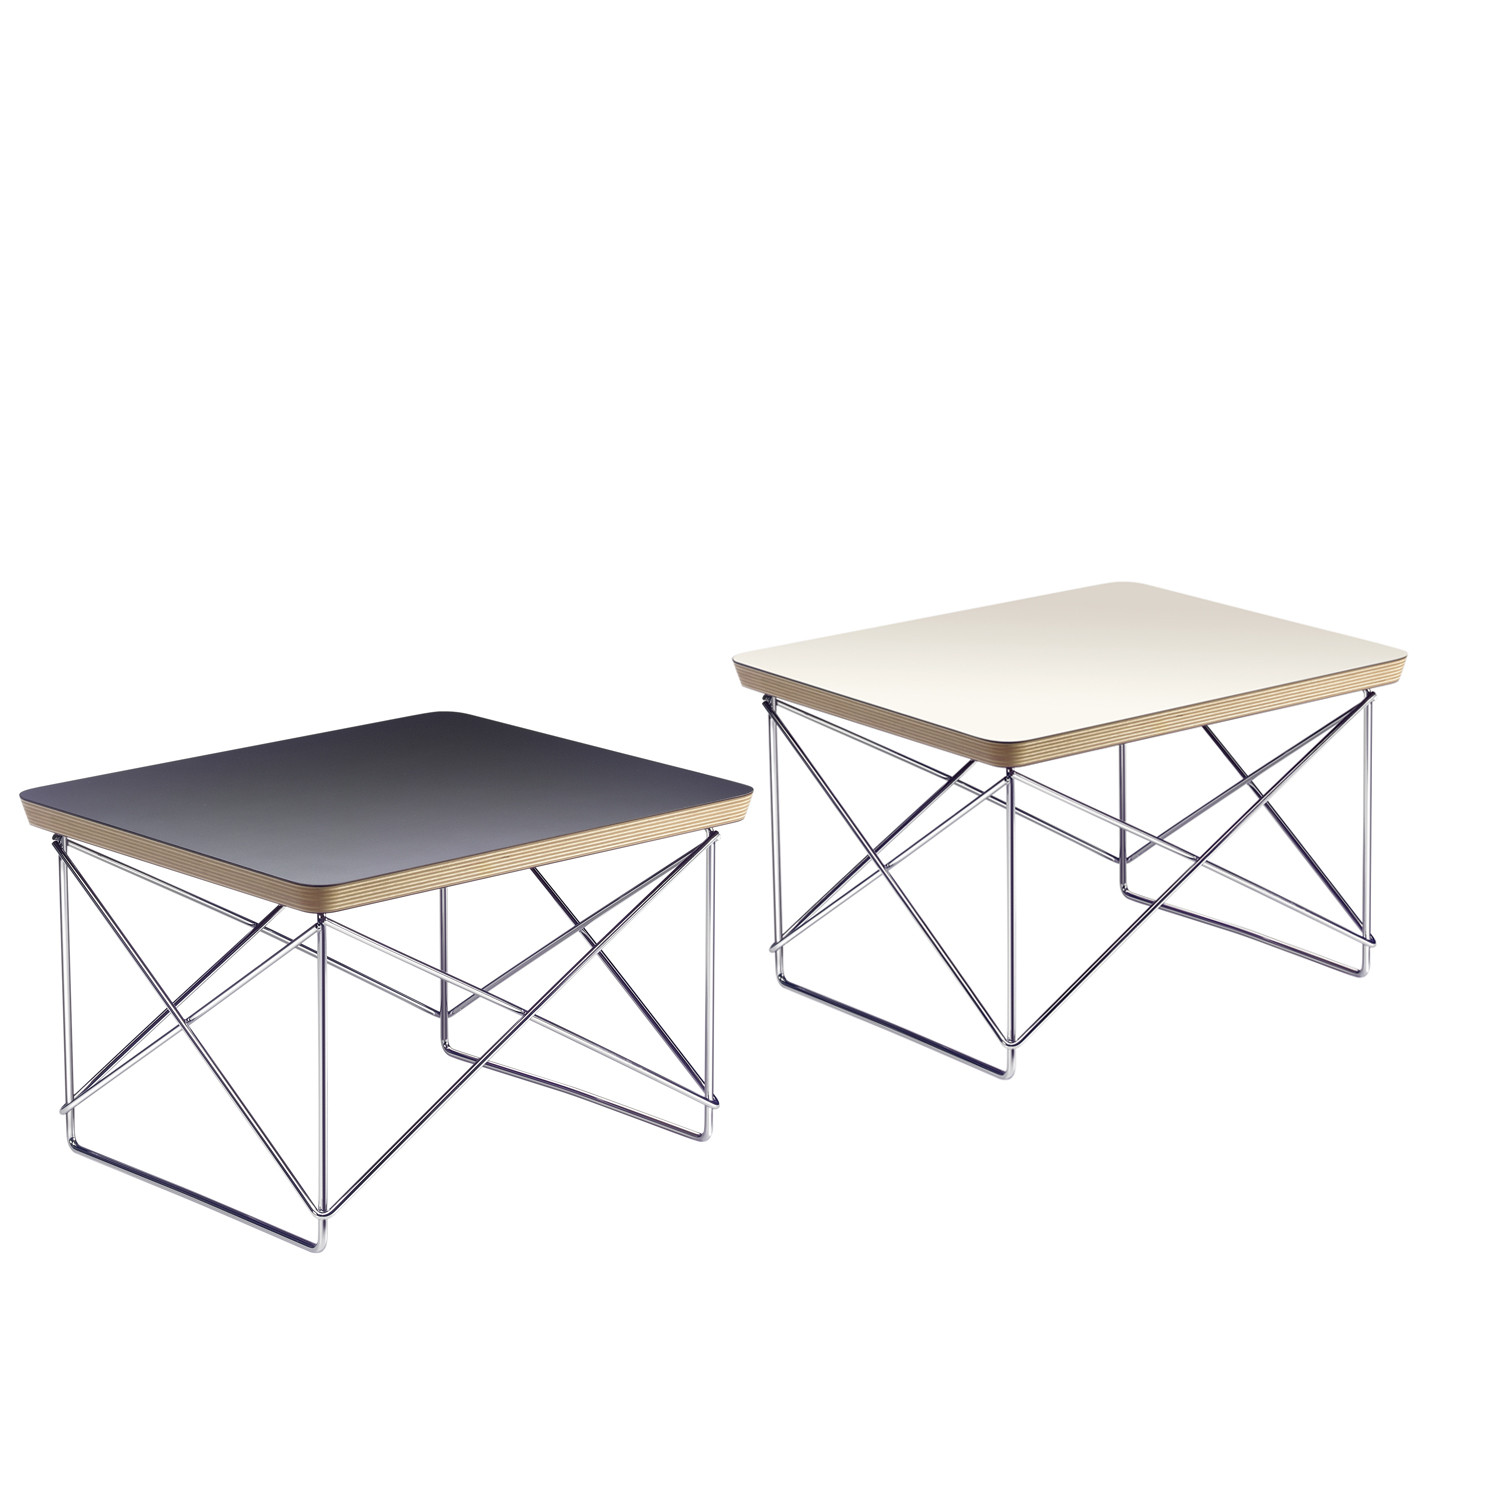 LTR Occasional Tables